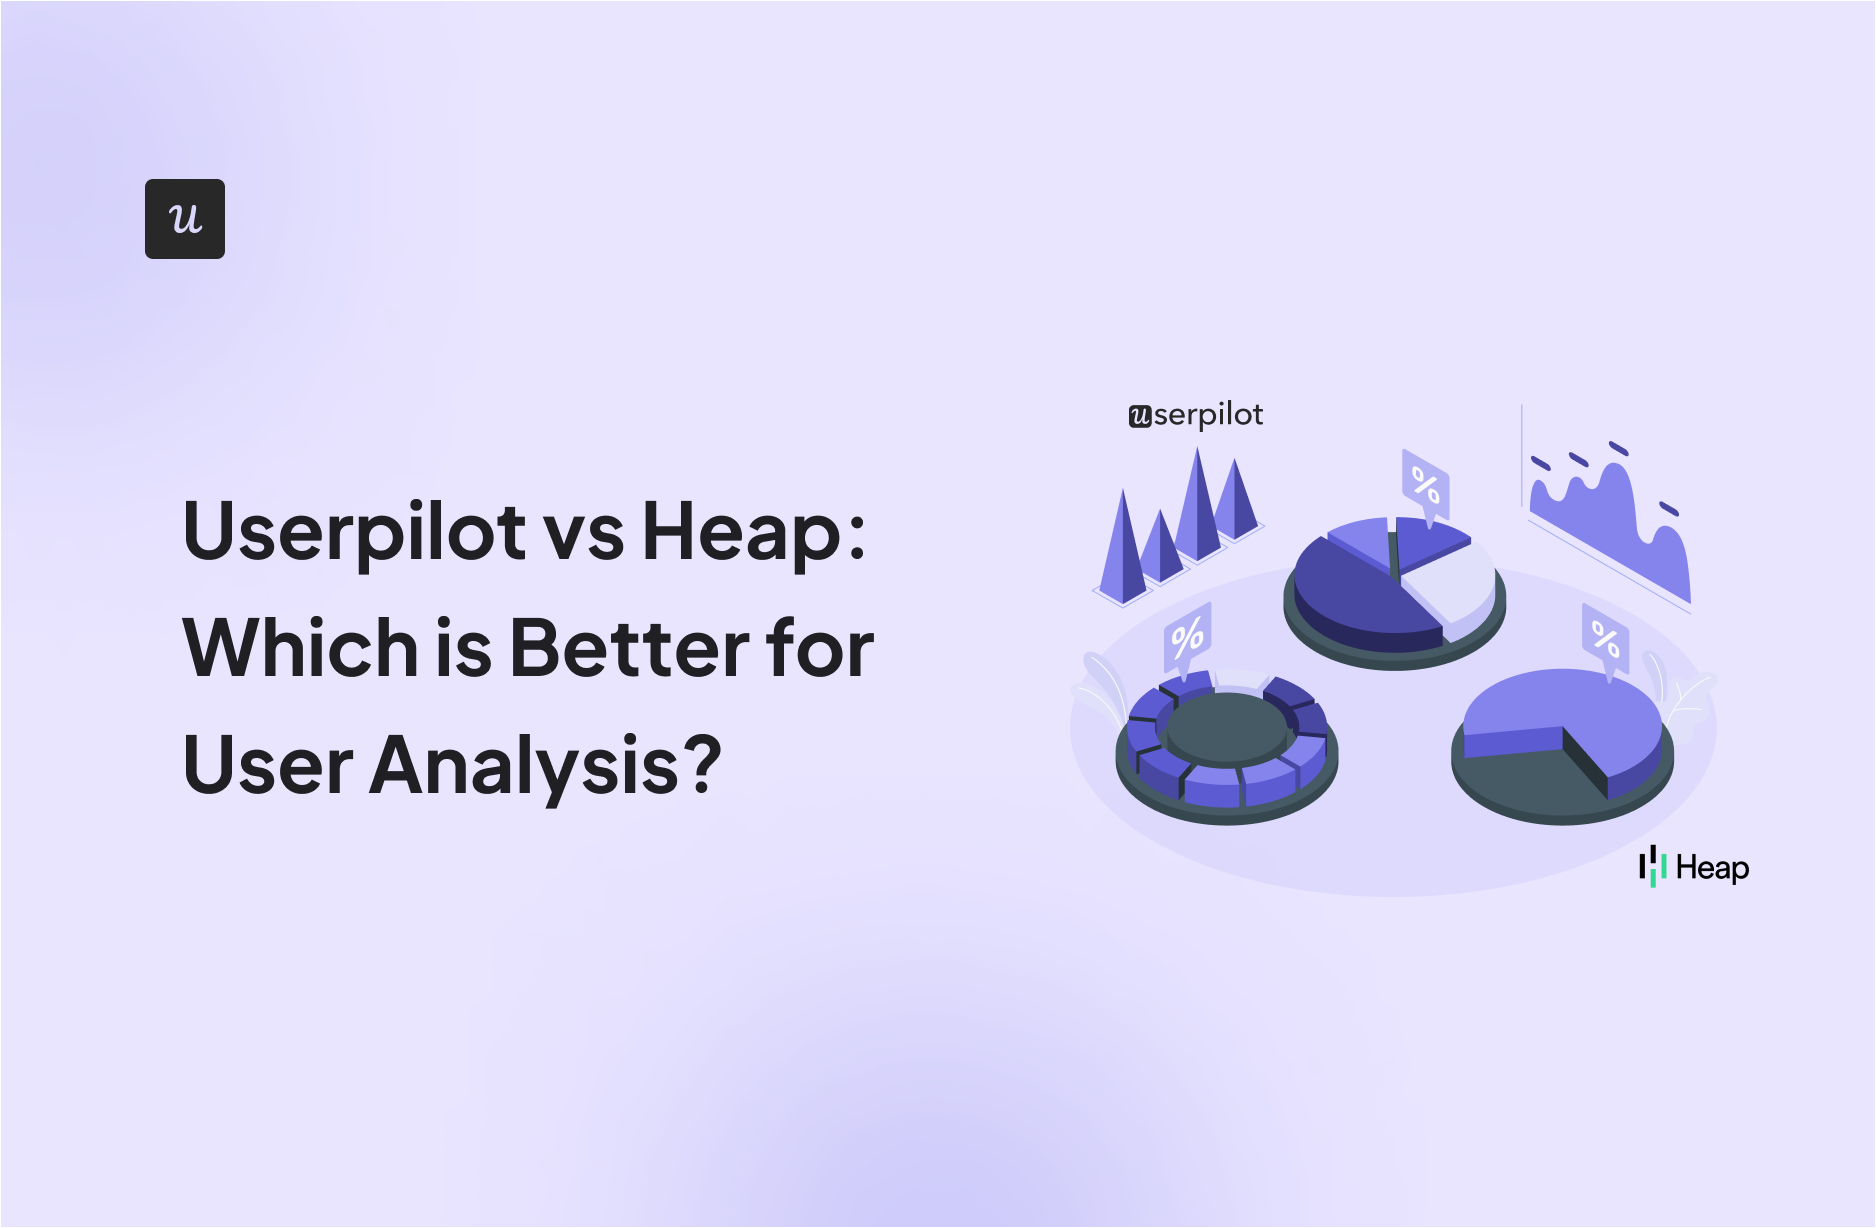 Userpilot vs Heap: Which is Better for User Analysis?